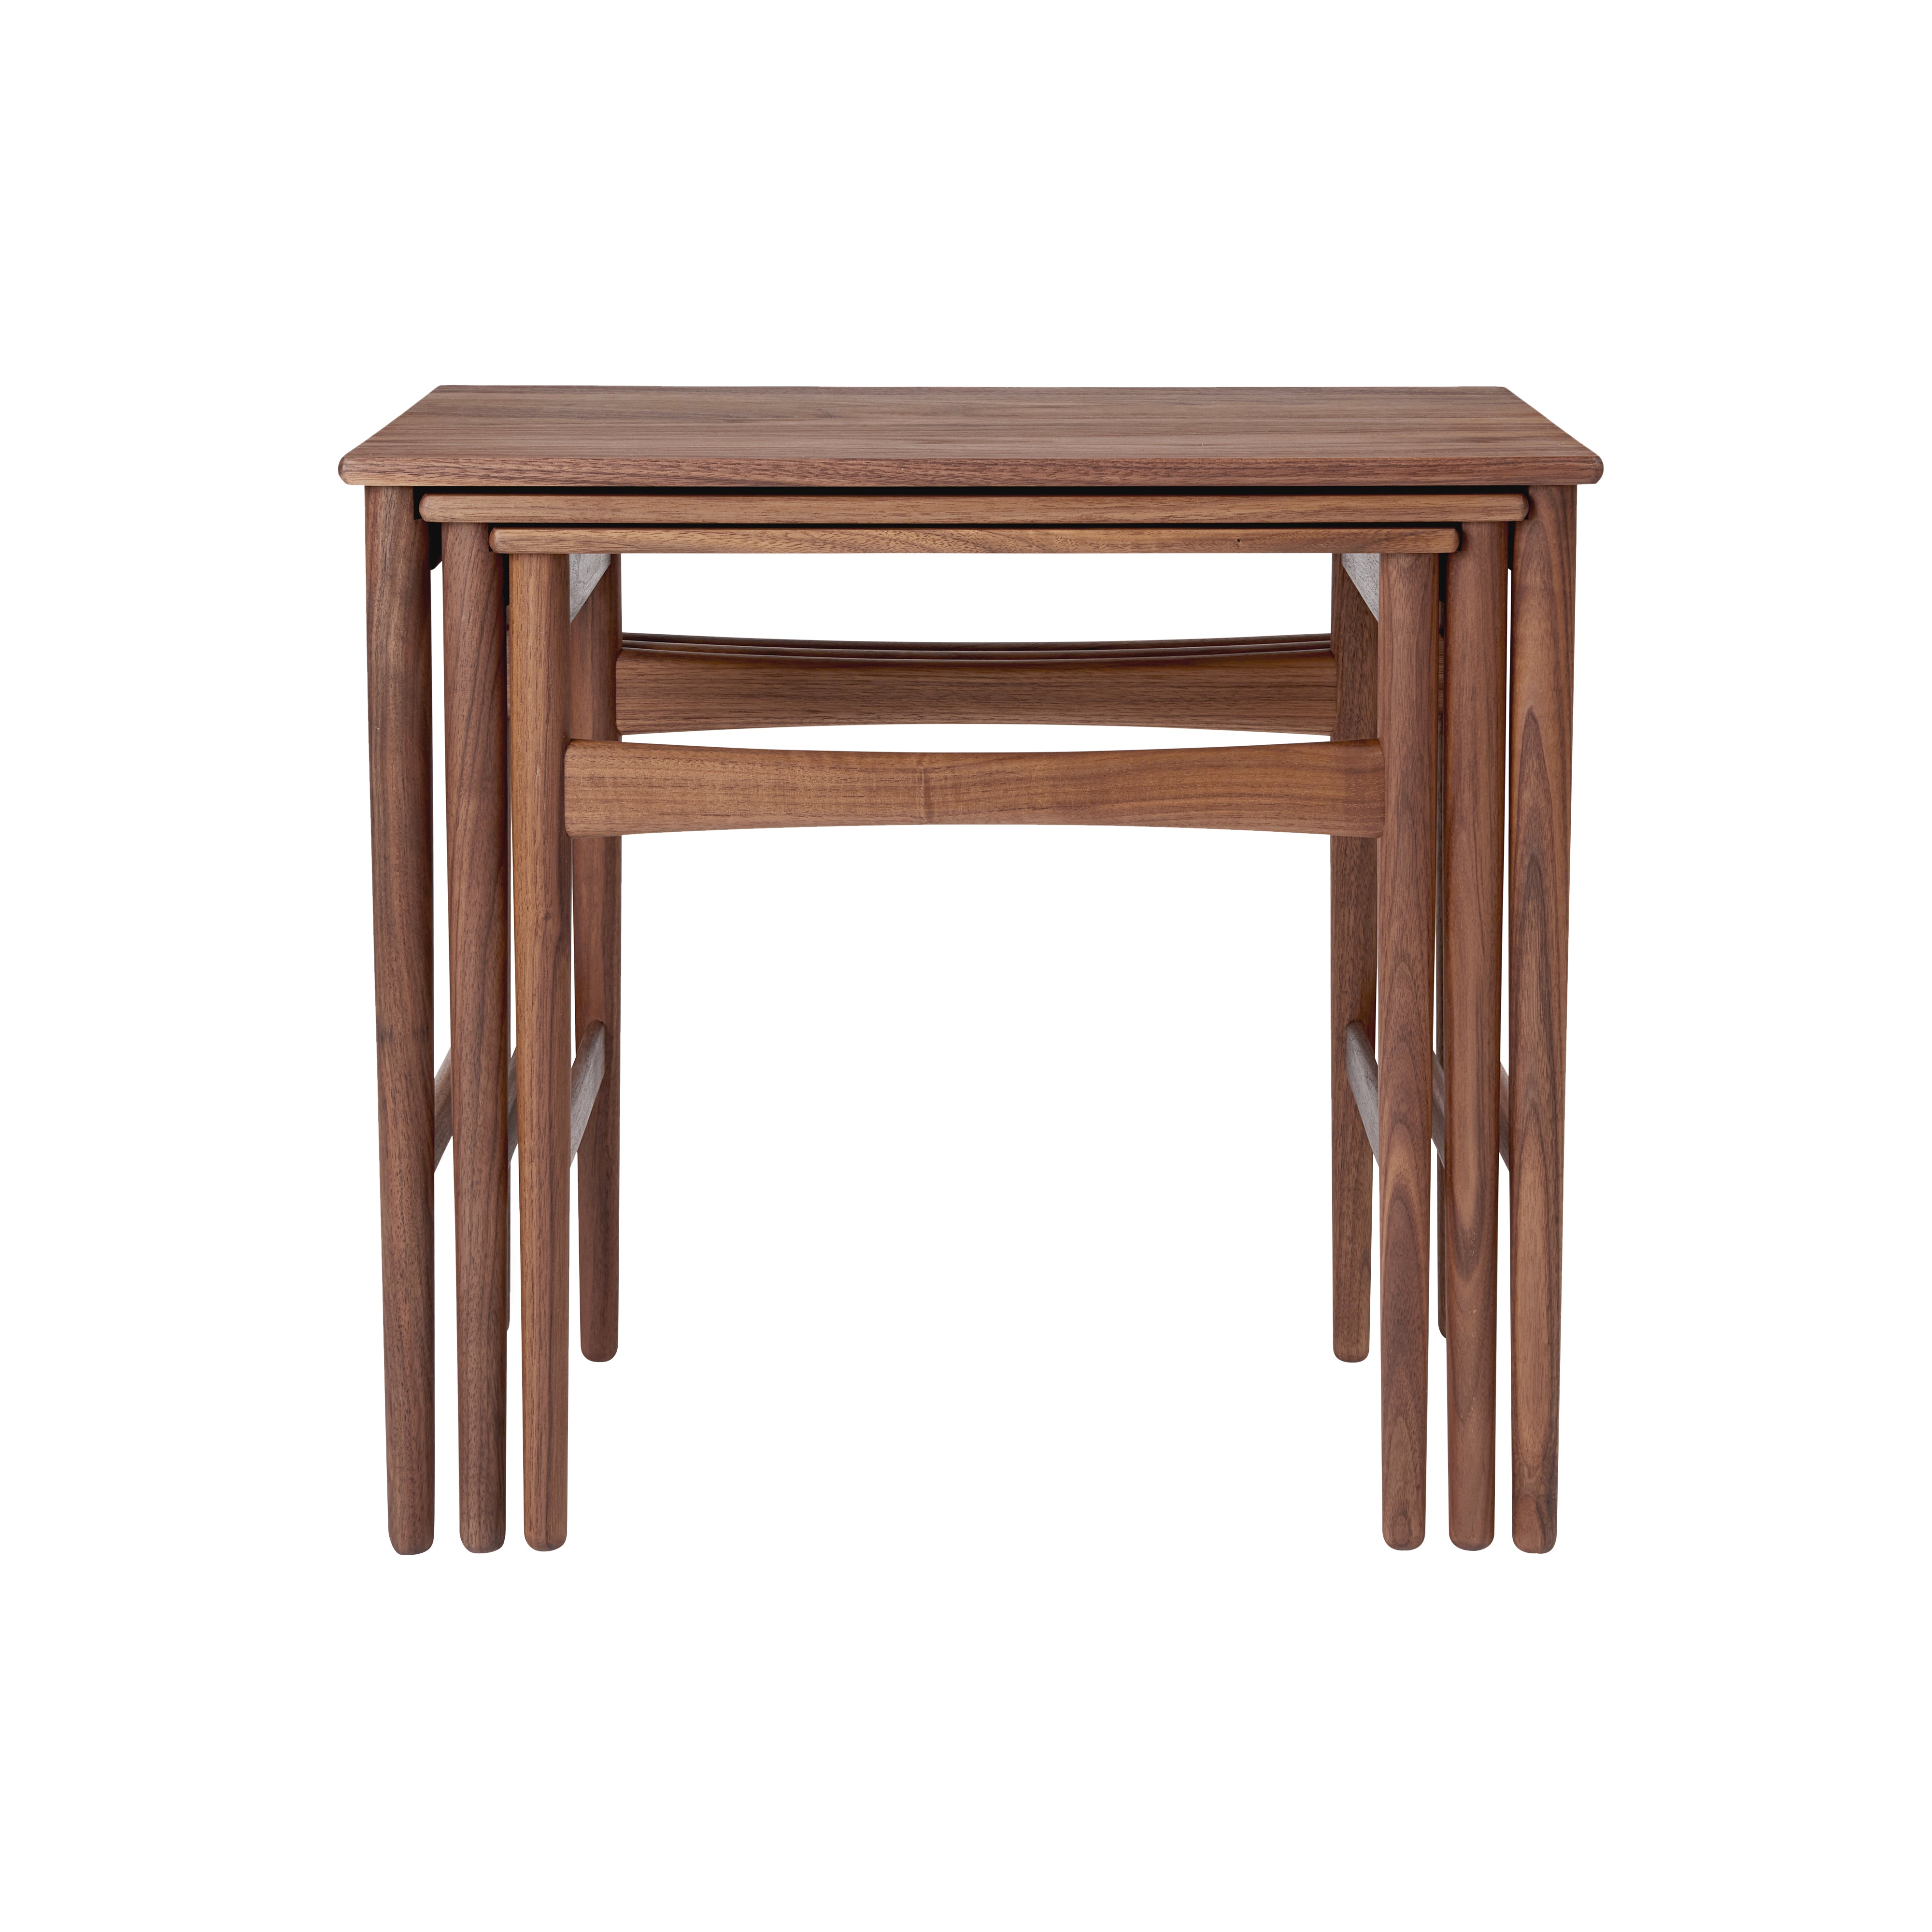 CH004 Nesting Tables: Set of 3 + Oiled Walnut